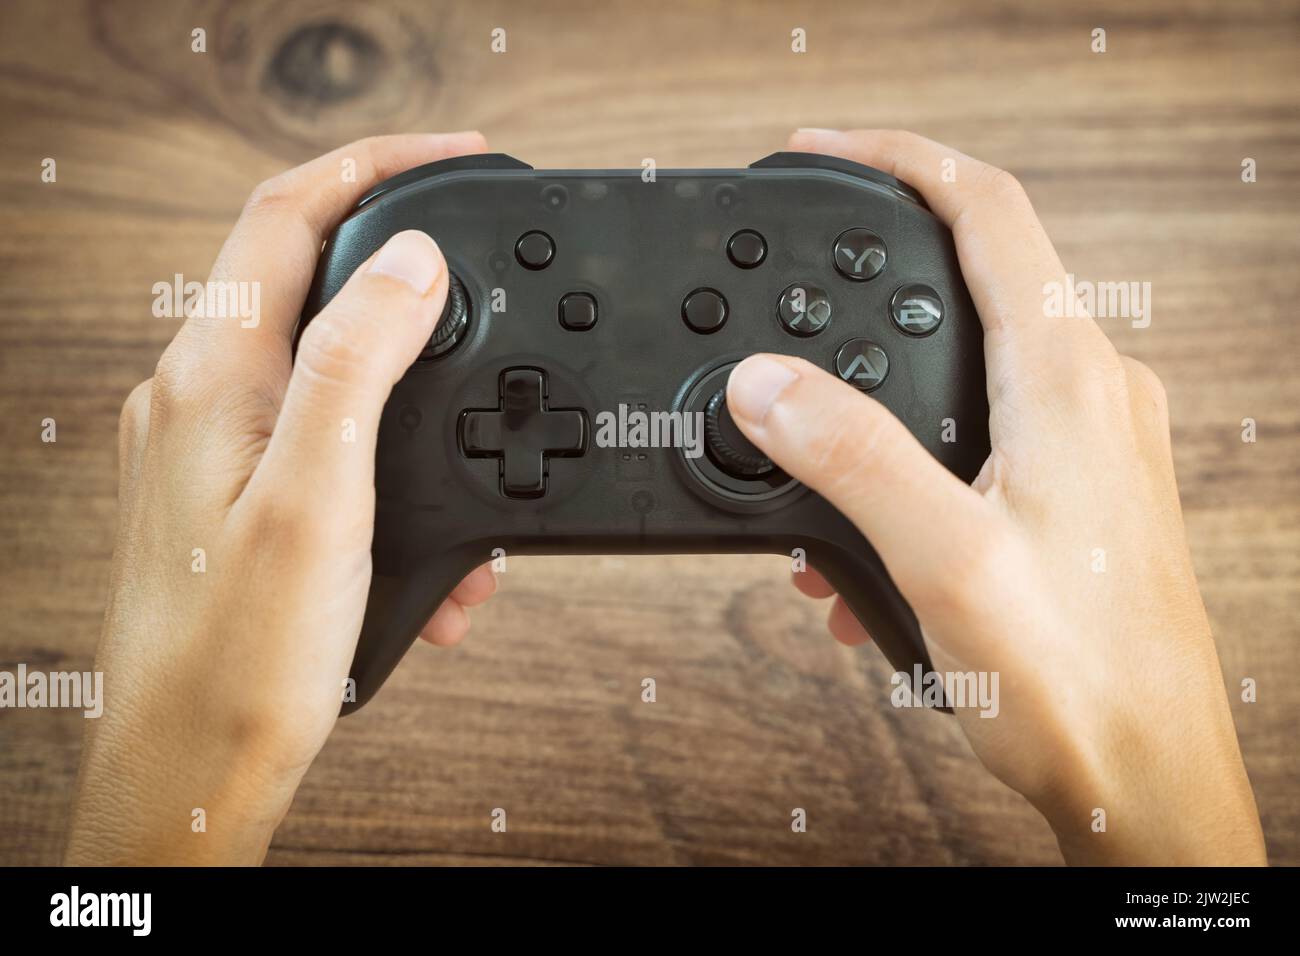 Hands Holding Black Wireless Gamepad On Top Of A Wooden Surface Stock Photo